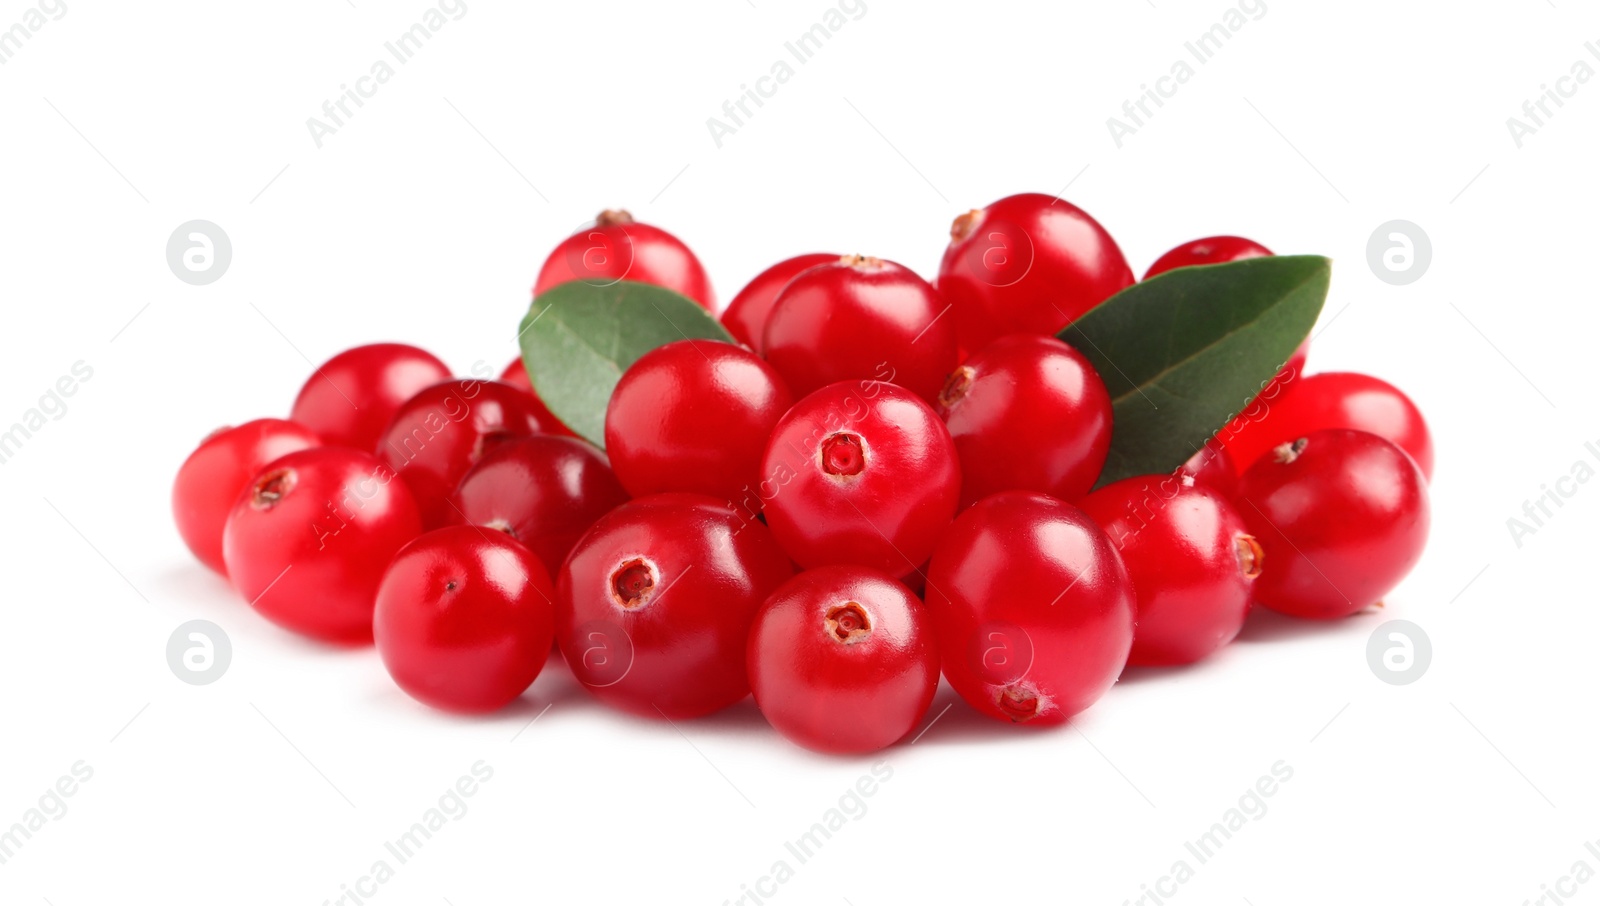 Photo of Pile of fresh cranberries with green leaves on white background